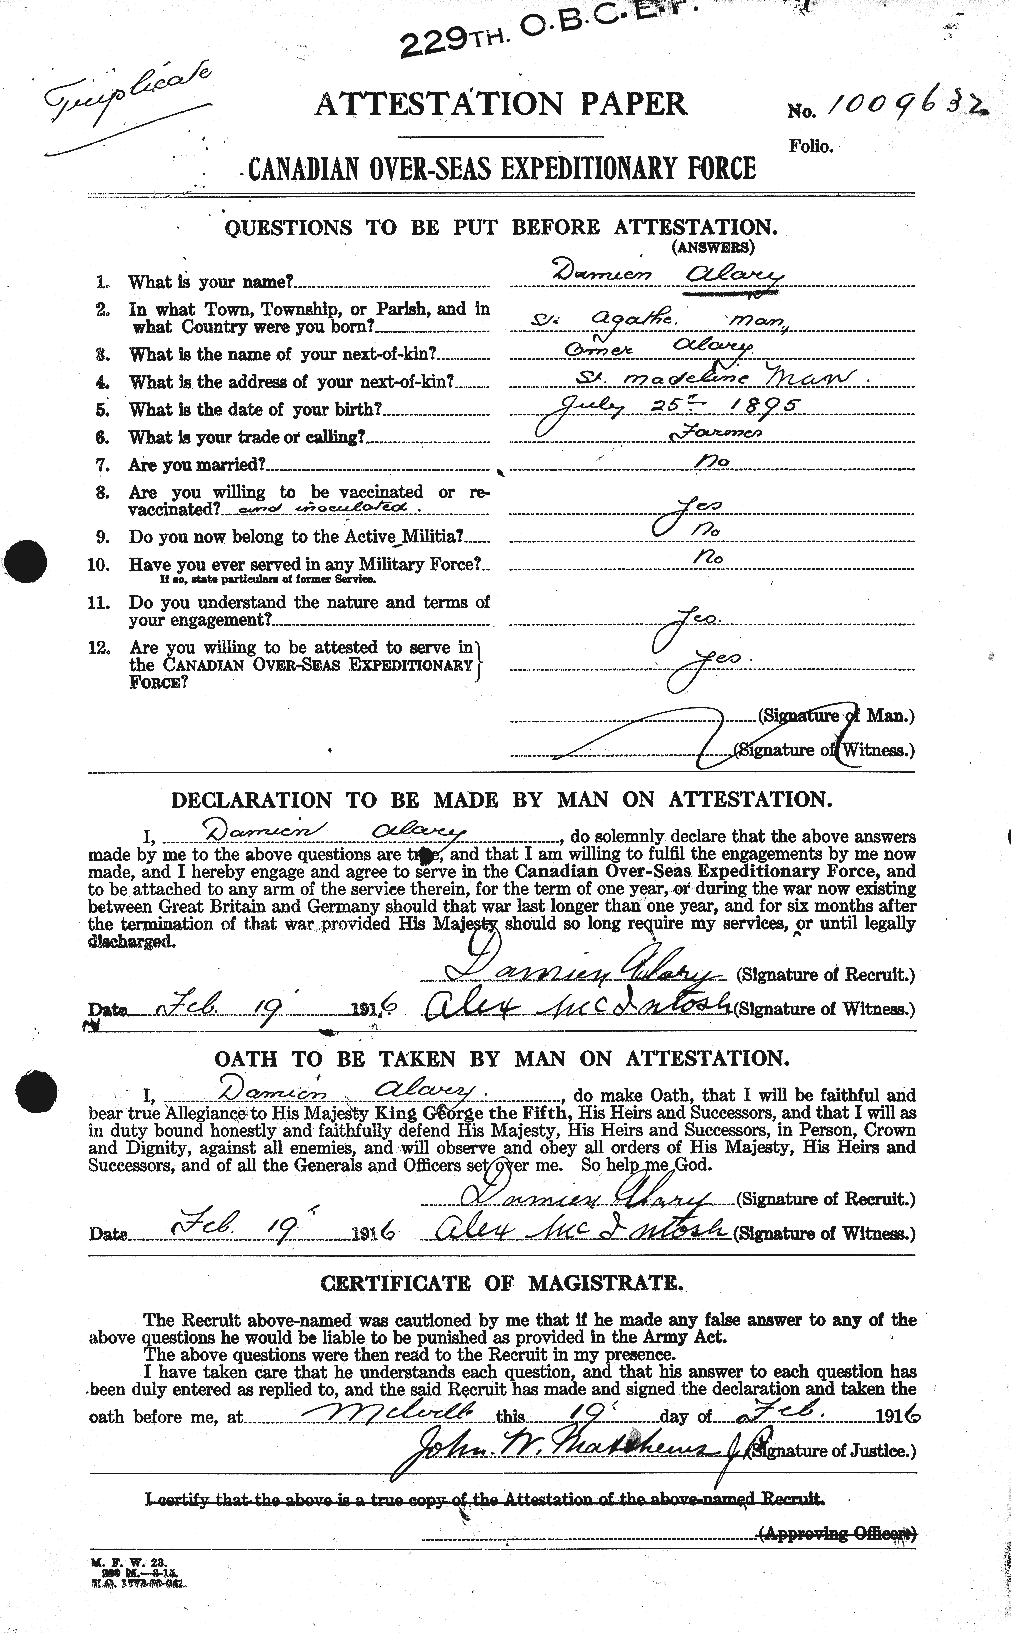 Personnel Records of the First World War - CEF 204521a